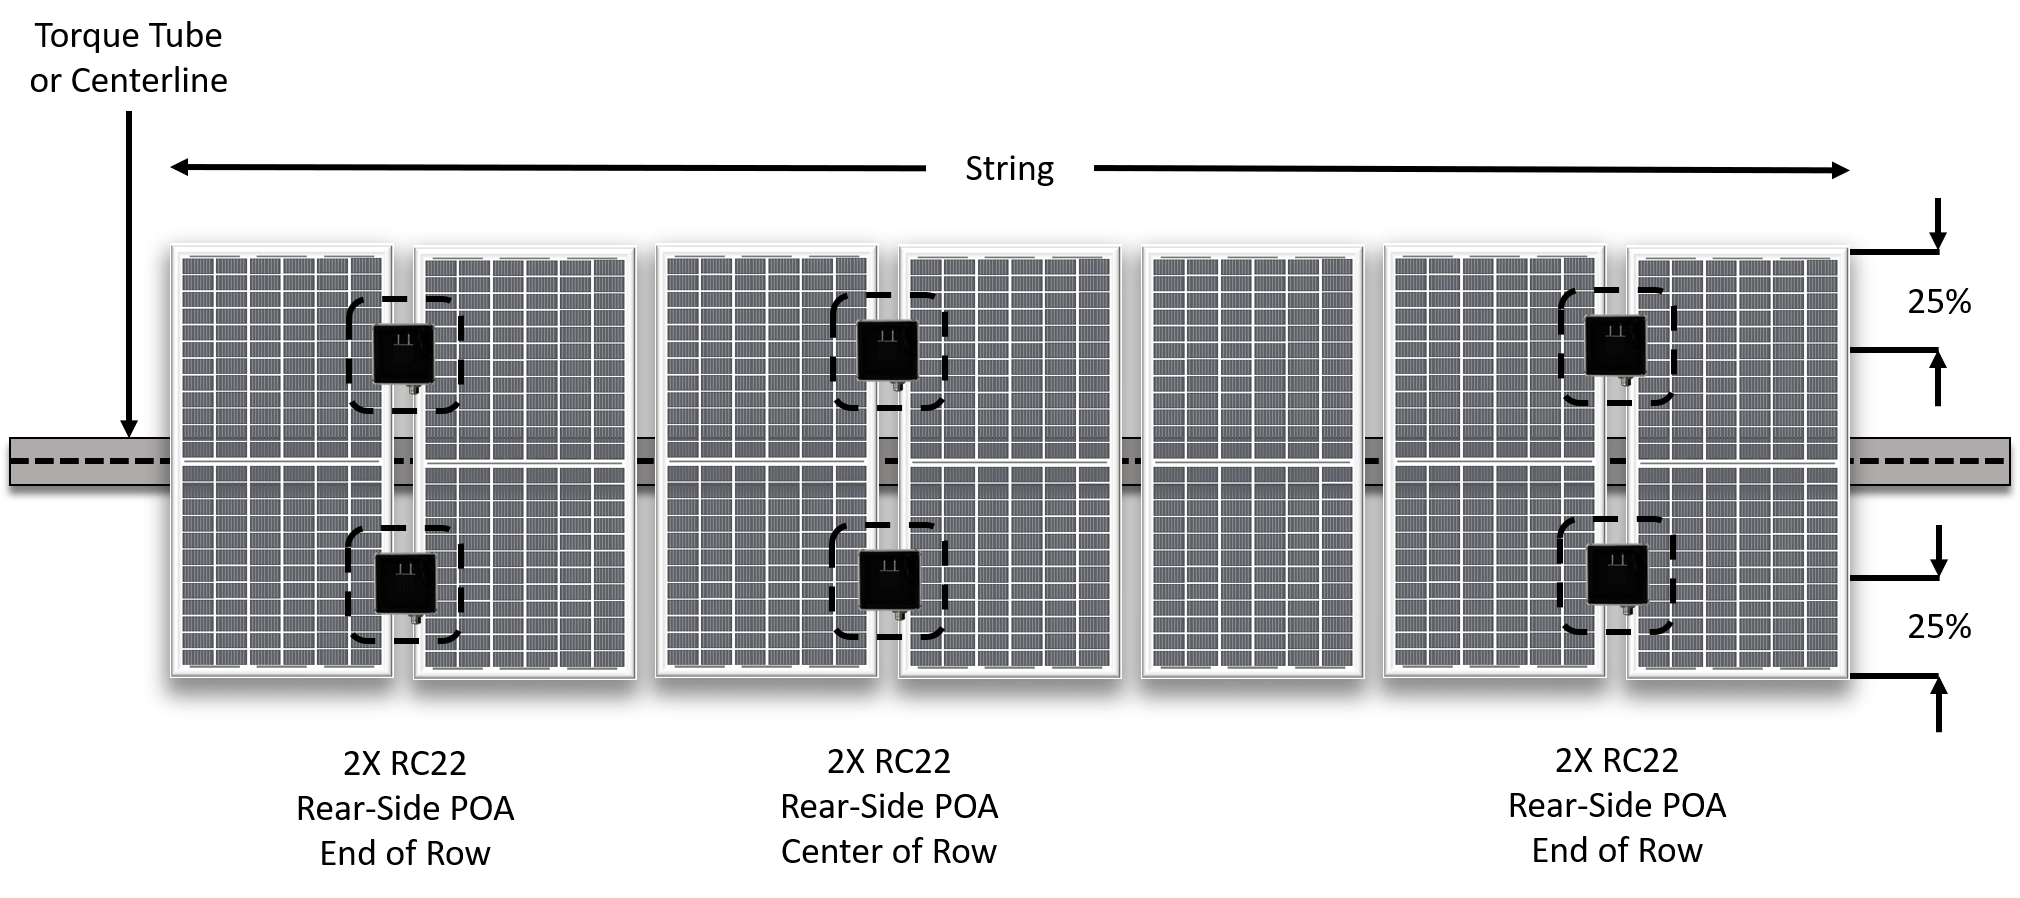 Recommended Sensor Position for Measuring Bifacial Irradiance wit Reference Cell